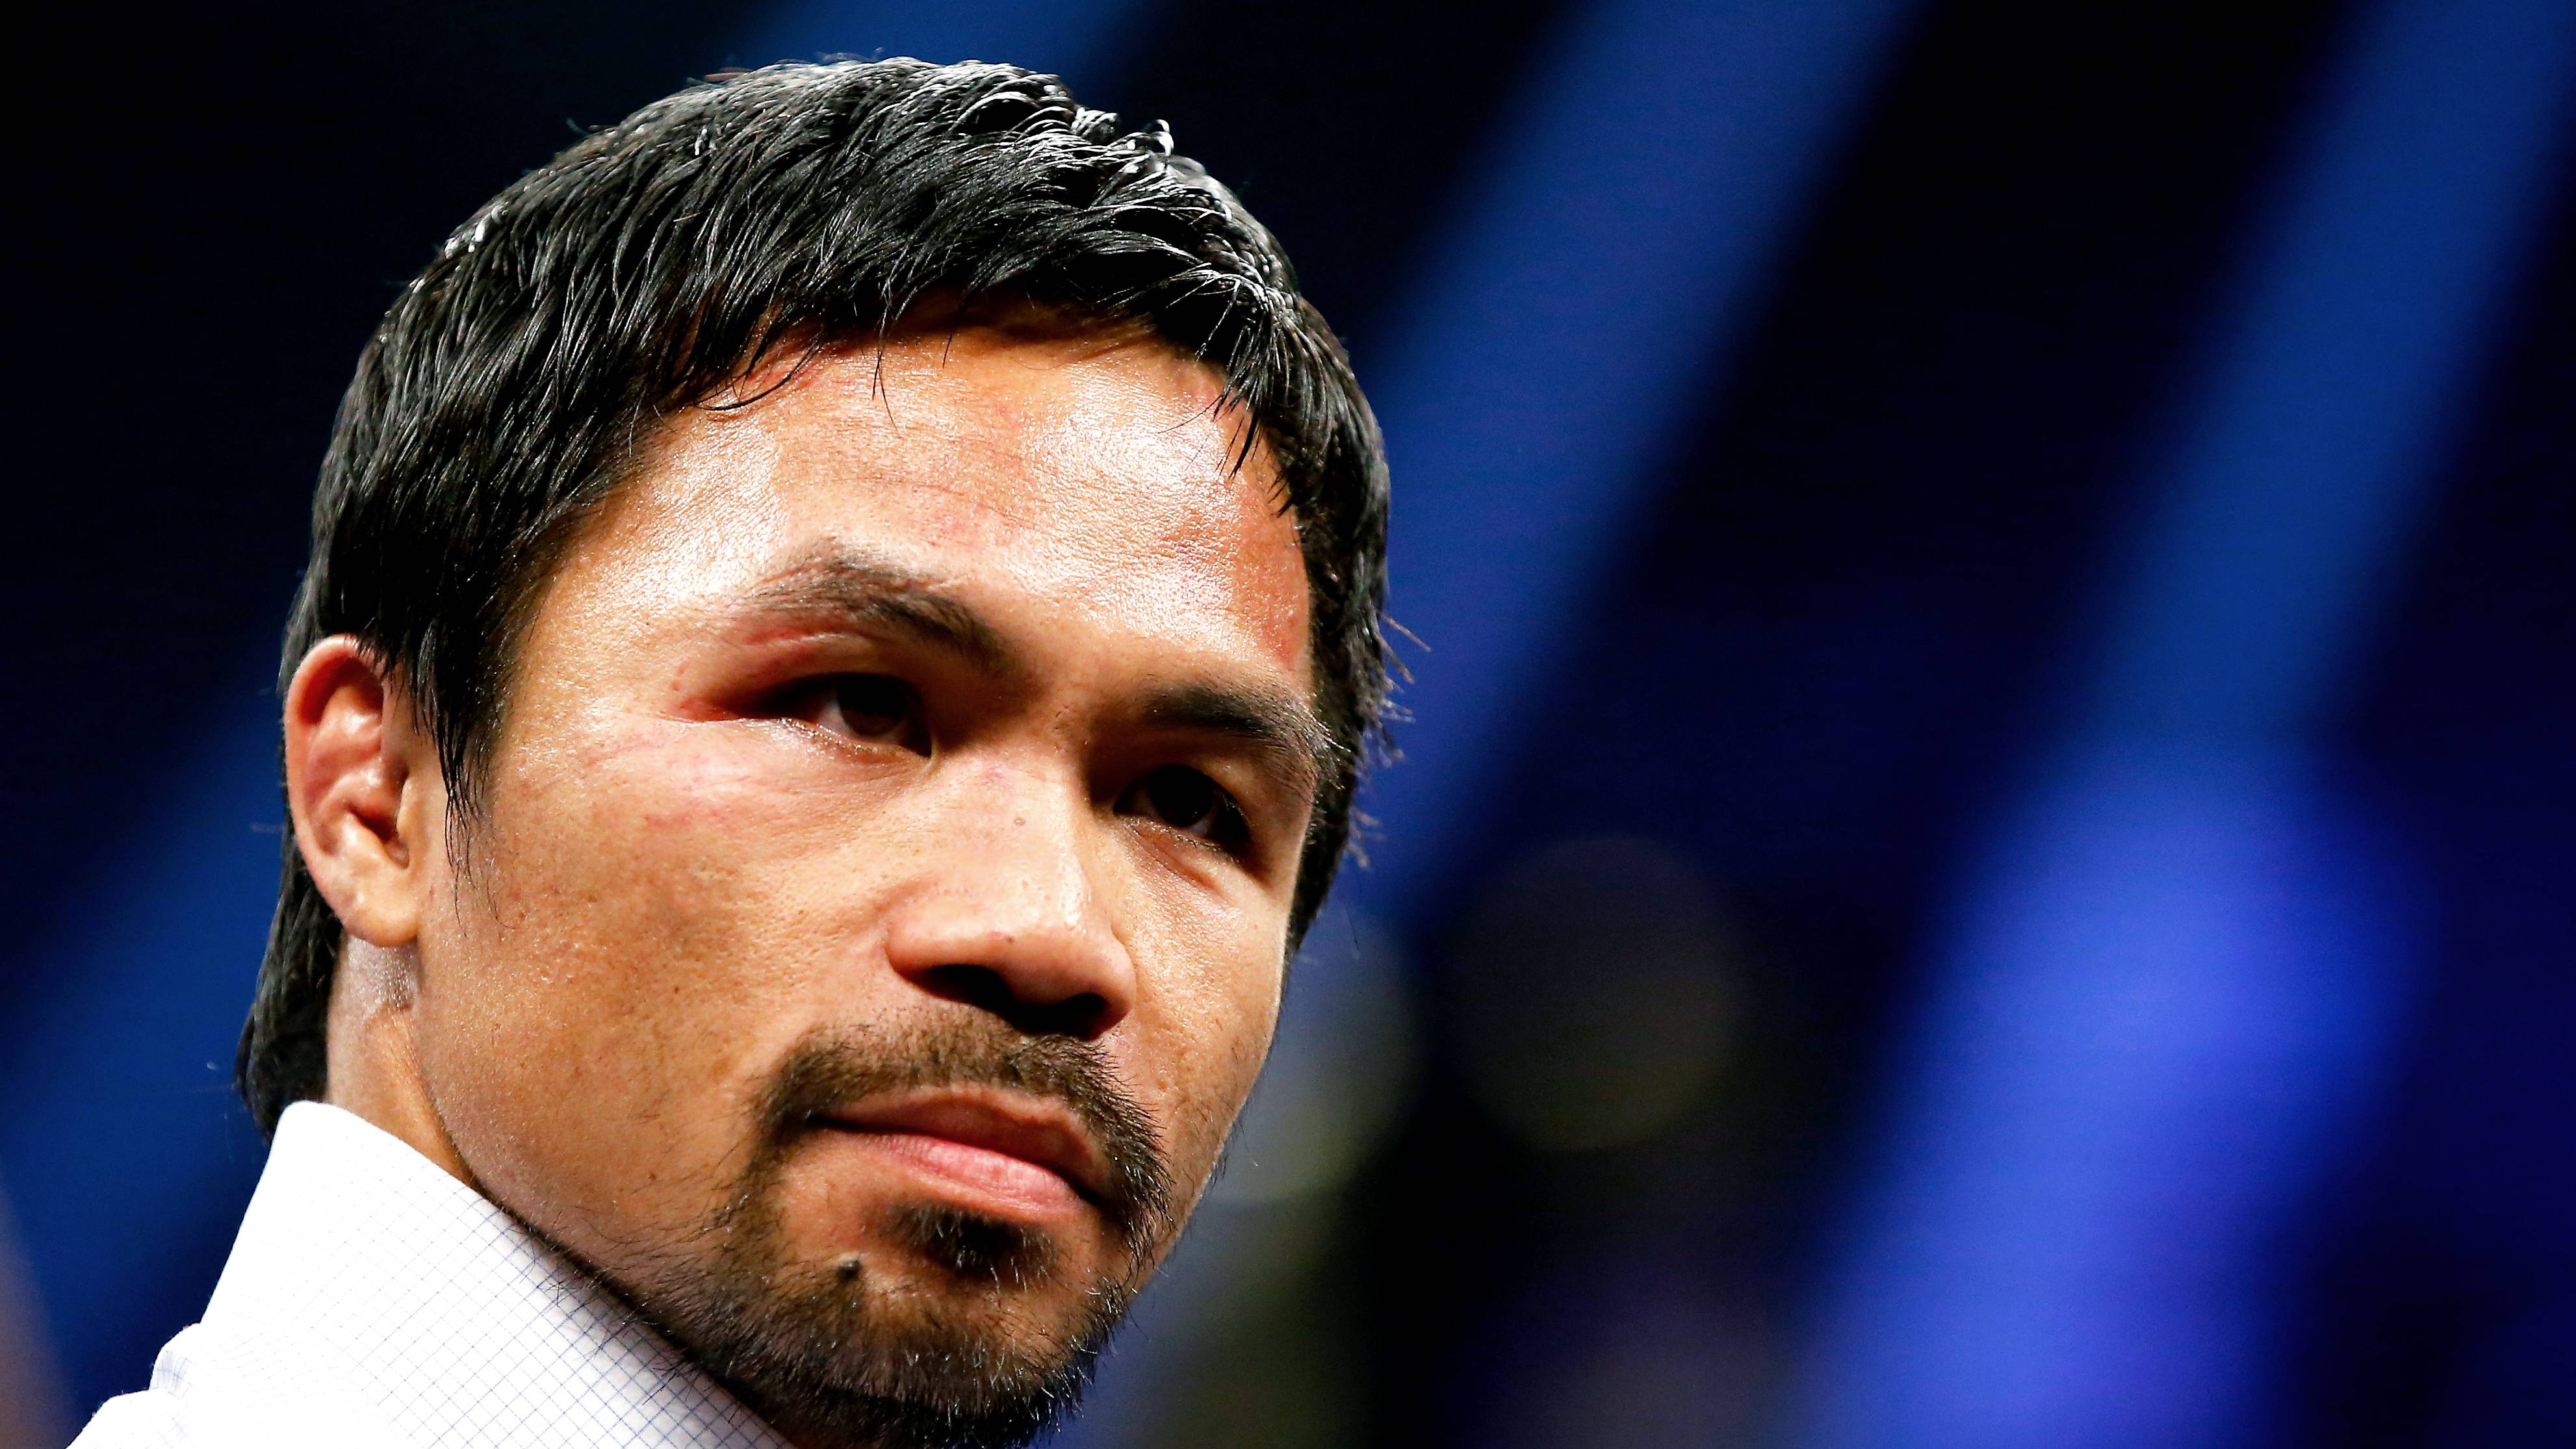 LAS VEGAS, NV - MAY 02:  Manny Pacquiao answers questions during the post-fight news conference after losing to Floyd Mayweather Jr. in their welterweight unification championship bout on May 2, 2015 at MGM Grand Garden Arena in Las Vegas, Nevada.  (Photo by Al Bello/Getty Images)